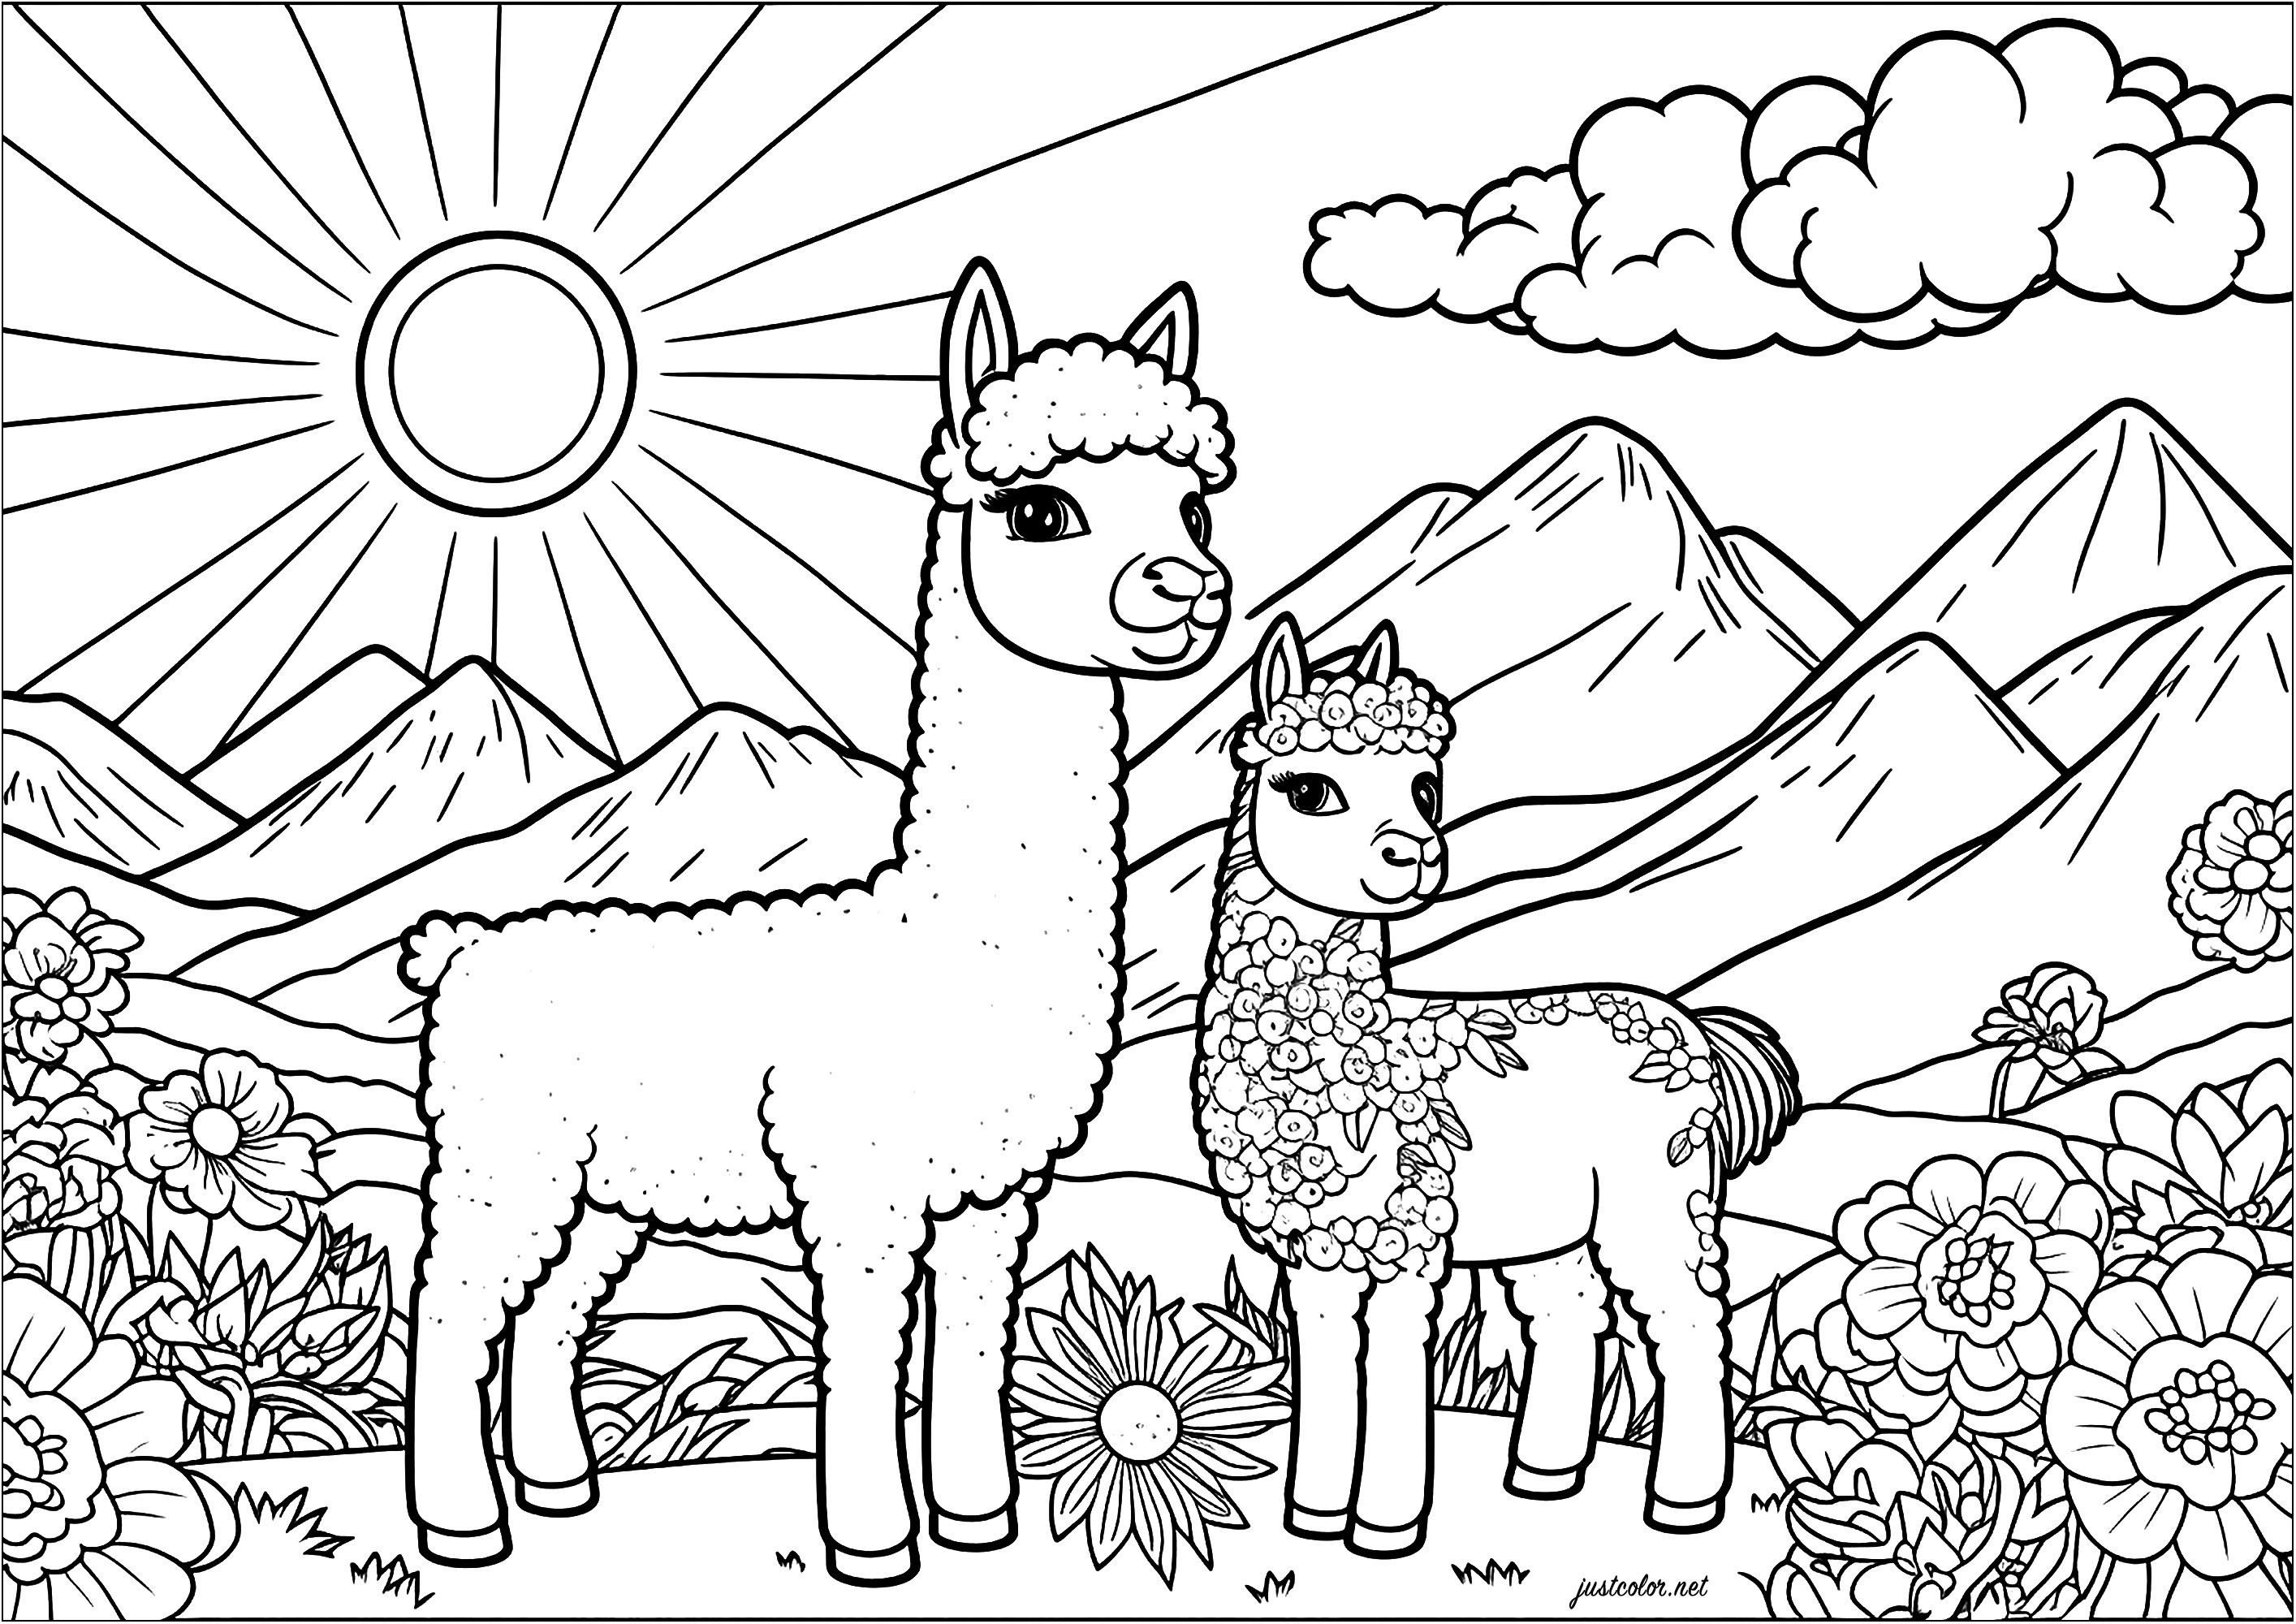 Coloring of two llamas in a dream landscape. The coloring page 'Two llamas: mother and baby' is a very simple drawing but with many details.
